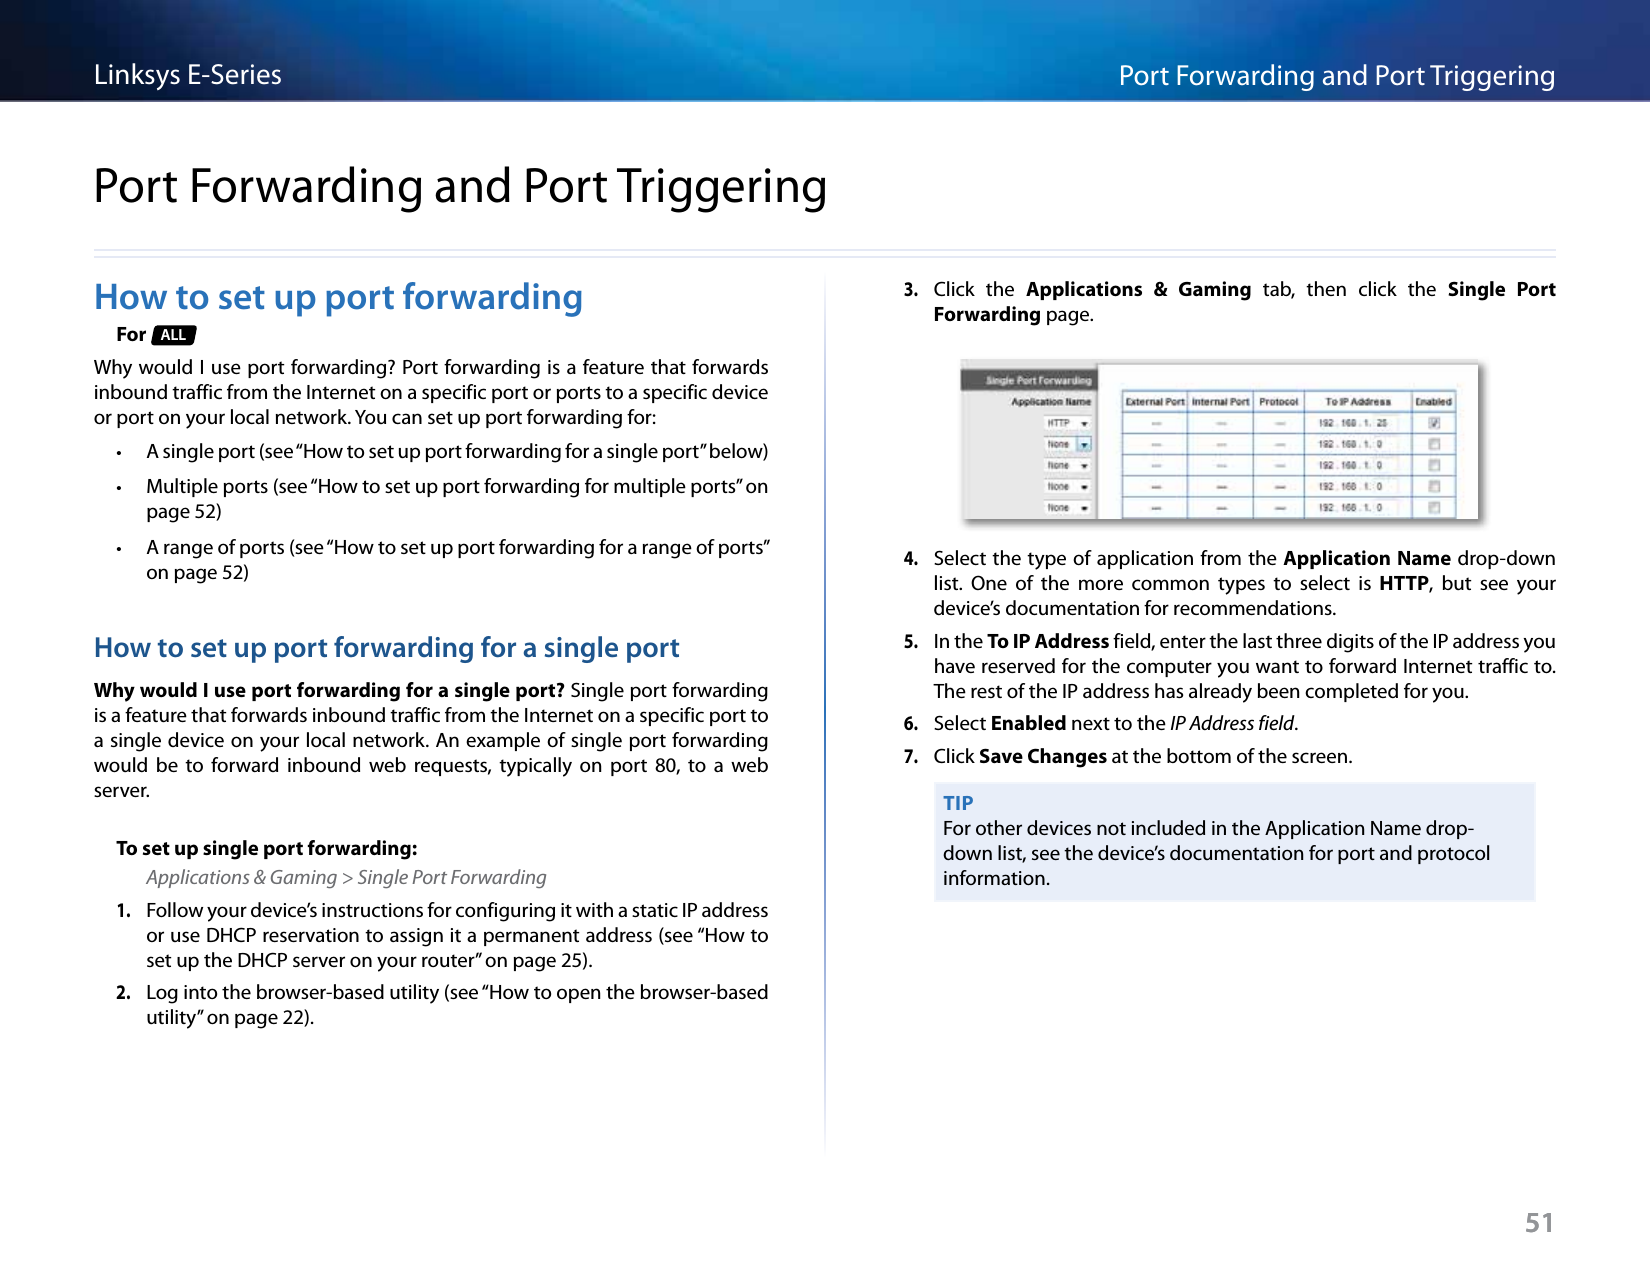 51Port Forwarding and Port TriggeringLinksys E-Series51How to set up port forwardingFor  ALLWhy would I use port forwarding? Port forwarding is a feature that forwards inbound traffic from the Internet on a specific port or ports to a specific device or port on your local network. You can set up port forwarding for: • A single port (see “How to set up port forwarding for a single port” below) • Multiple ports (see “How to set up port forwarding for multiple ports” on page 52) • A range of ports (see “How to set up port forwarding for a range of ports” on page 52)How to set up port forwarding for a single portWhy would I use port forwarding for a single port? Single port forwarding is a feature that forwards inbound traffic from the Internet on a specific port to a single device on your local network. An example of single port forwarding would  be  to  forward  inbound  web  requests,  typically  on  port  80,  to  a  web server. To set up single port forwarding:Applications &amp; Gaming &gt; Single Port Forwarding1. Follow your device’s instructions for configuring it with a static IP address or use DHCP reservation to assign it a permanent address (see “How to set up the DHCP server on your router” on page 25).2. Log into the browser-based utility (see “How to open the browser-based utility” on page 22). 3. Click  the  Applications  &amp;  Gaming  tab,  then  click  the  Single  Port Forwarding page.4. Select the type of application from the Application Name drop-down list.  One  of  the  more  common  types  to  select  is  HTTP,  but  see  your device’s documentation for recommendations. 5. In the To IP Address field, enter the last three digits of the IP address you have reserved for the computer you want to forward Internet traffic to. The rest of the IP address has already been completed for you. 6. Select Enabled next to the IP Address field.7. Click Save Changes at the bottom of the screen.TIPFor other devices not included in the Application Name drop-down list, see the device’s documentation for port and protocol information.Port Forwarding and Port Triggering